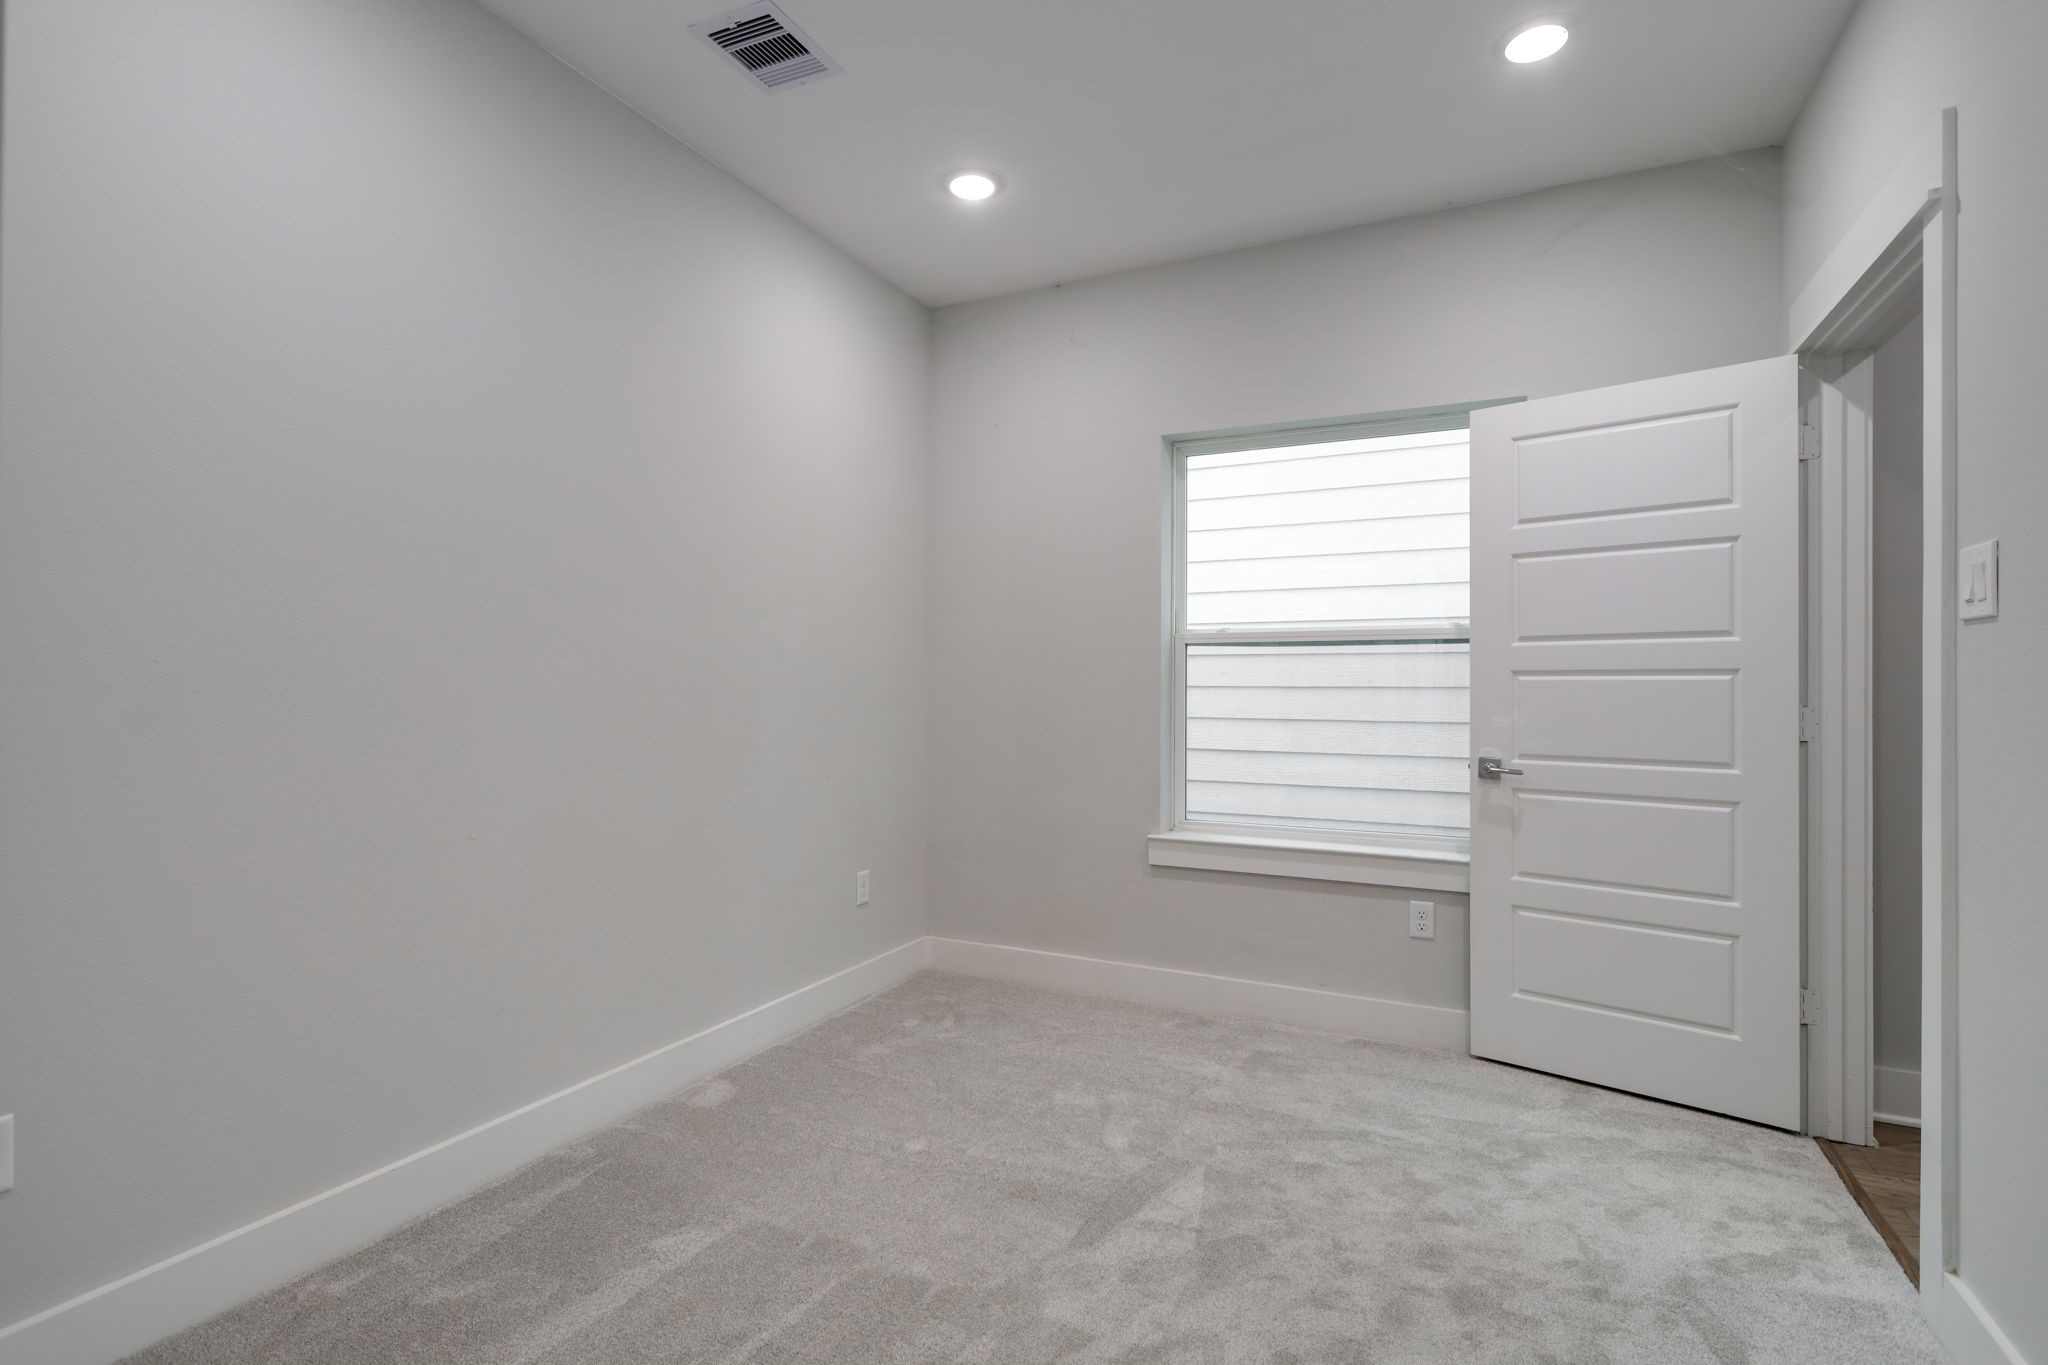 This secondary bedroom can serves as a guest bedroom with its convenient location on the first floor.